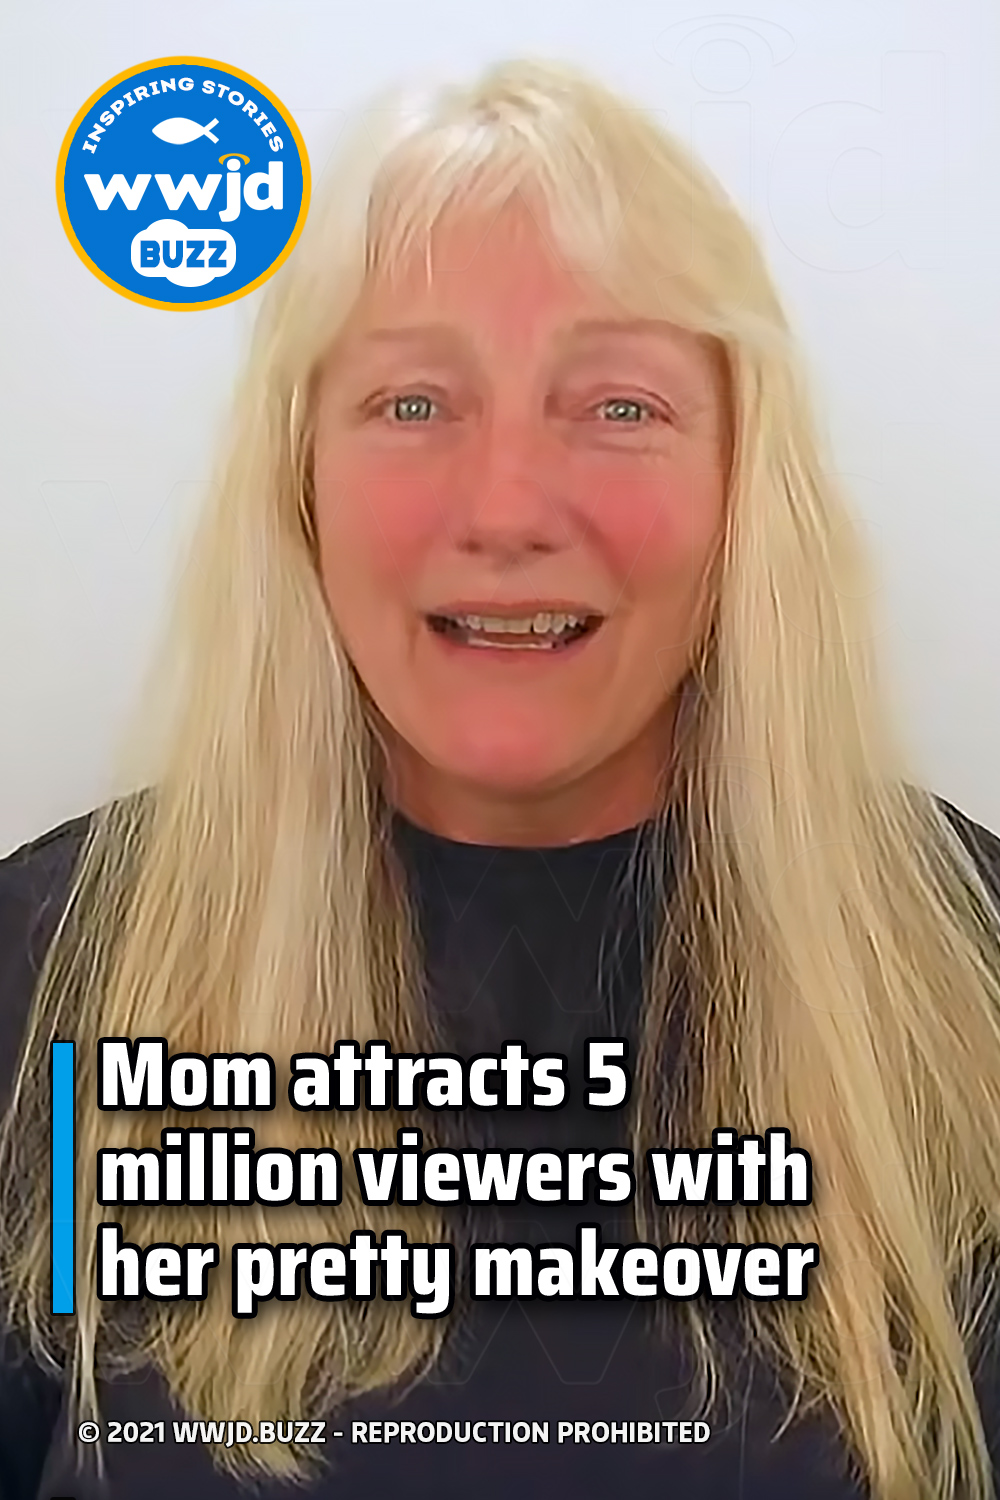 Mom attracts 5 million viewers with her pretty makeover